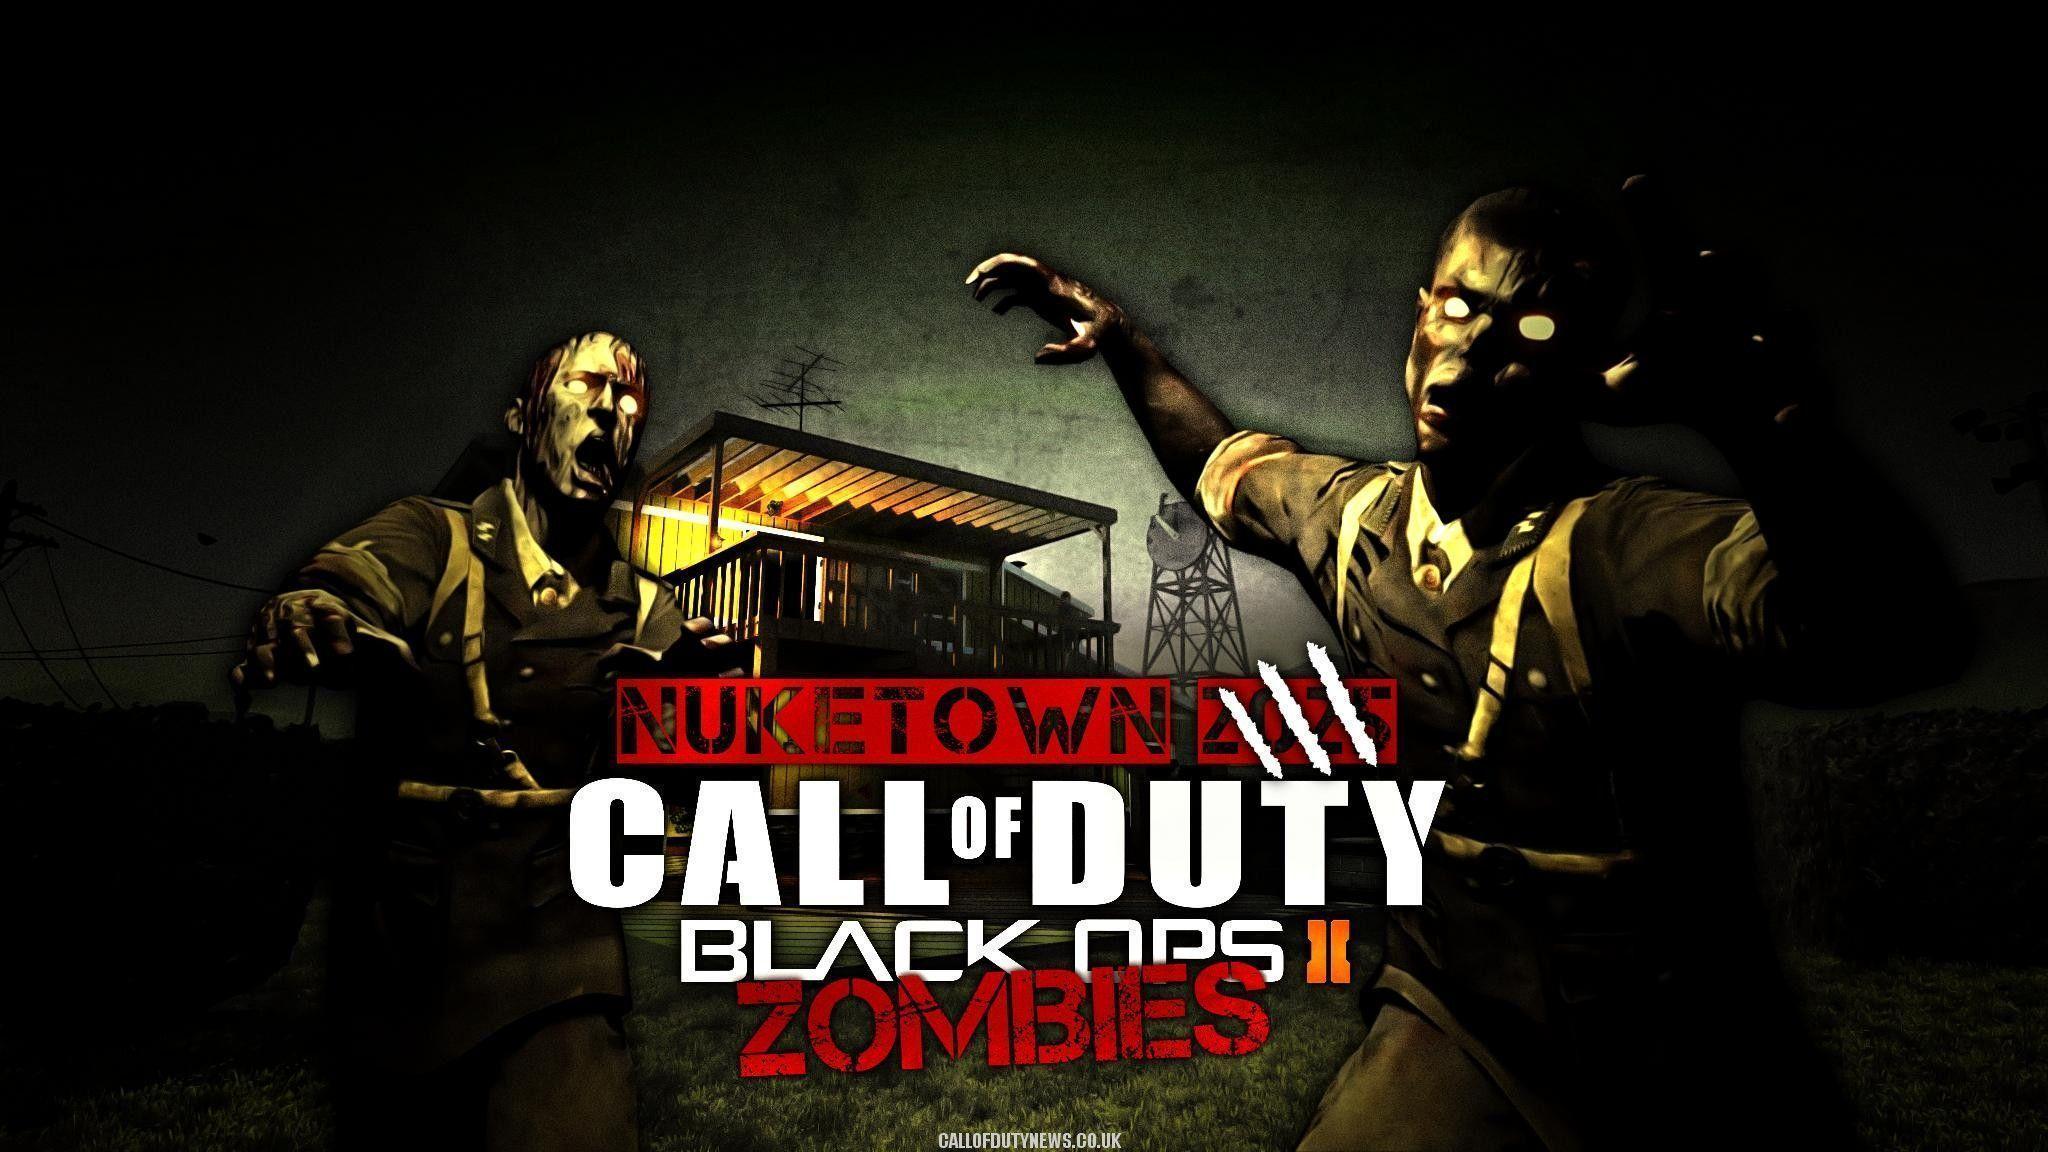 Call of Duty Black Ops 2 Zombies